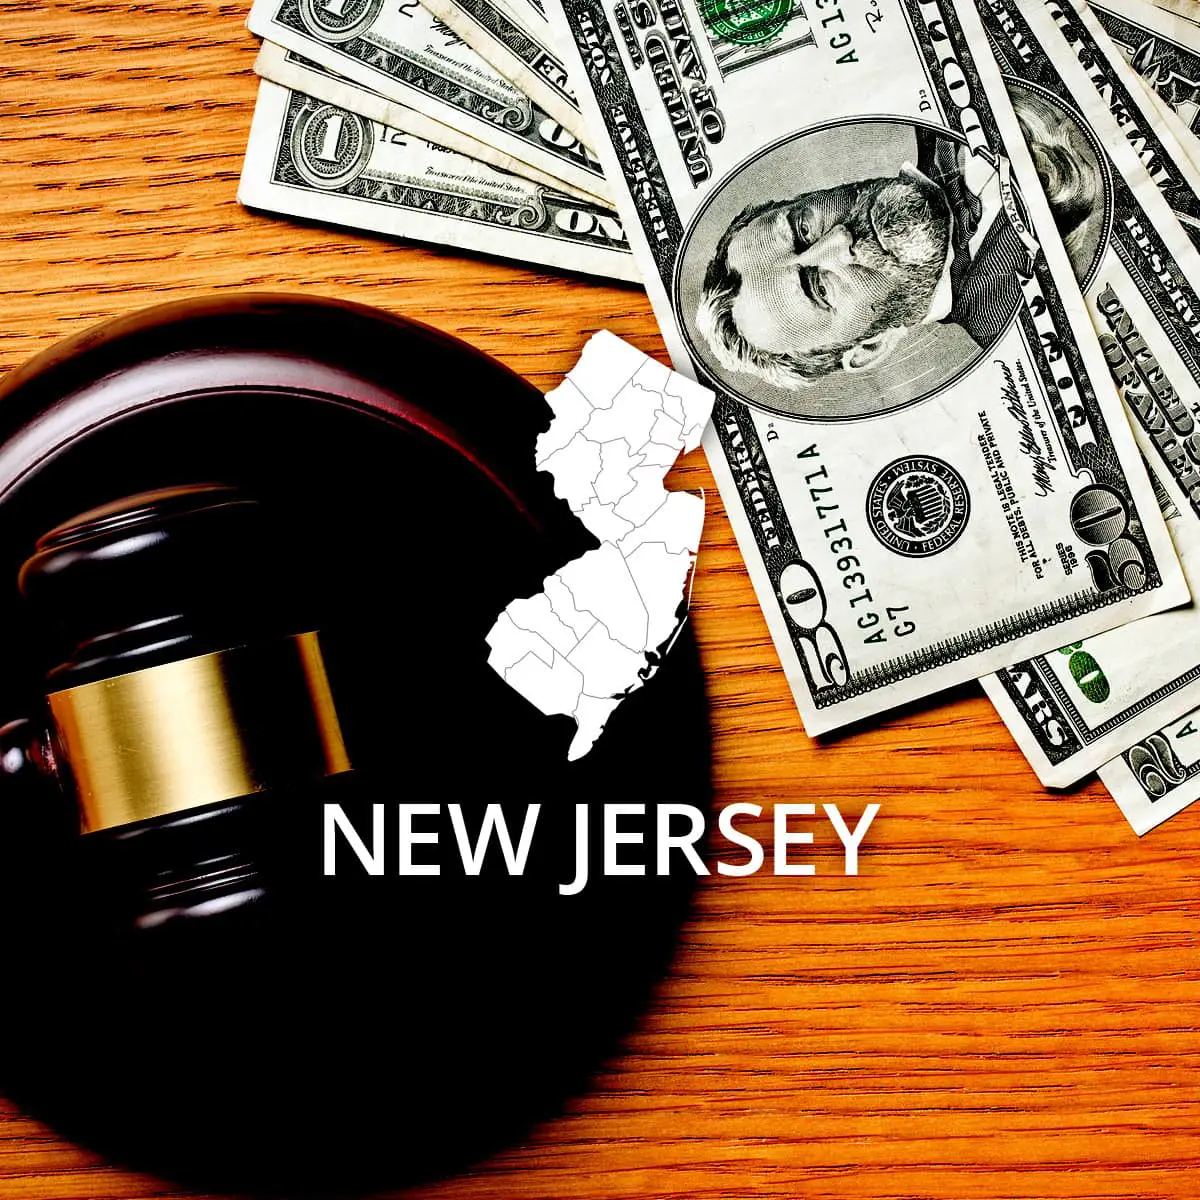 How to File Bankruptcy in New Jersey